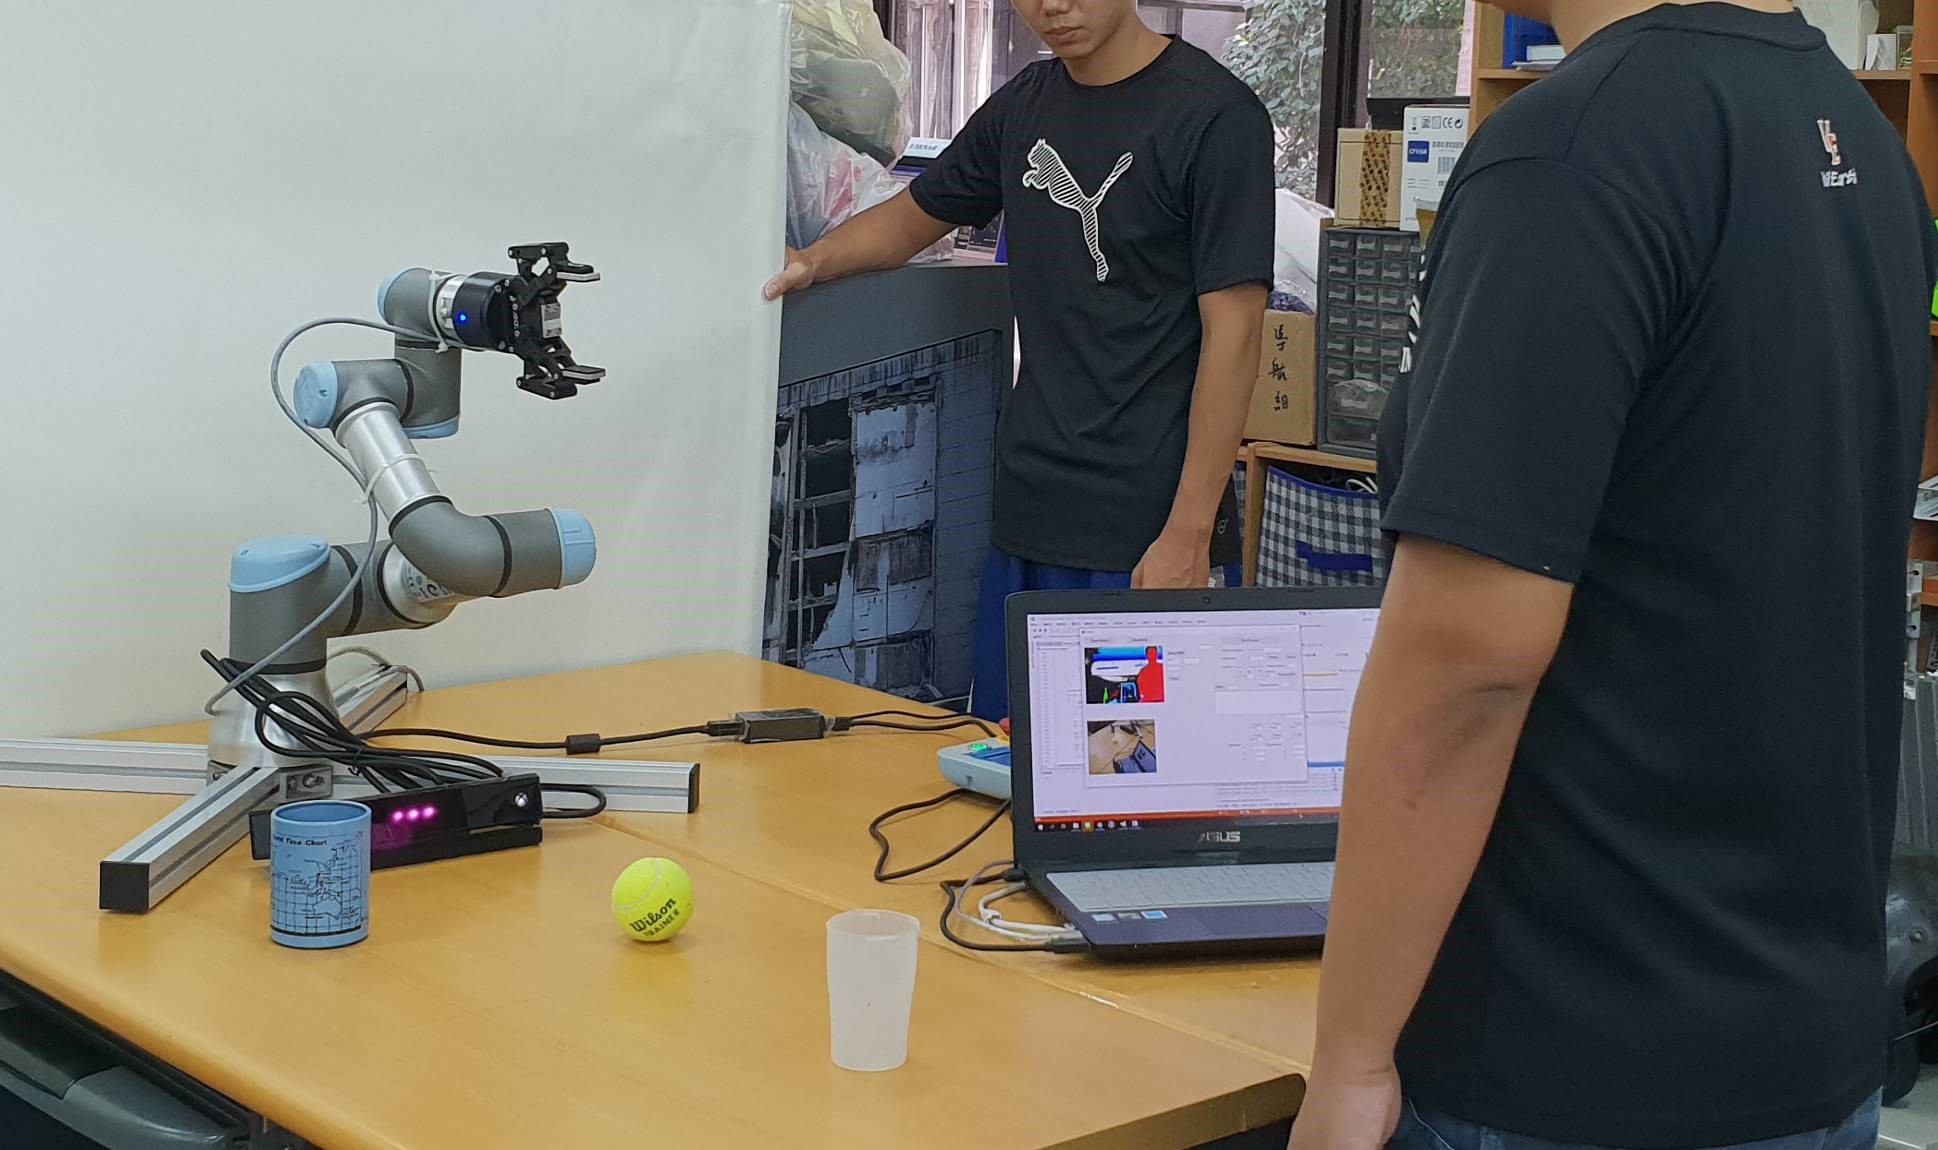 Development of Learning from Human Demonstration Robot